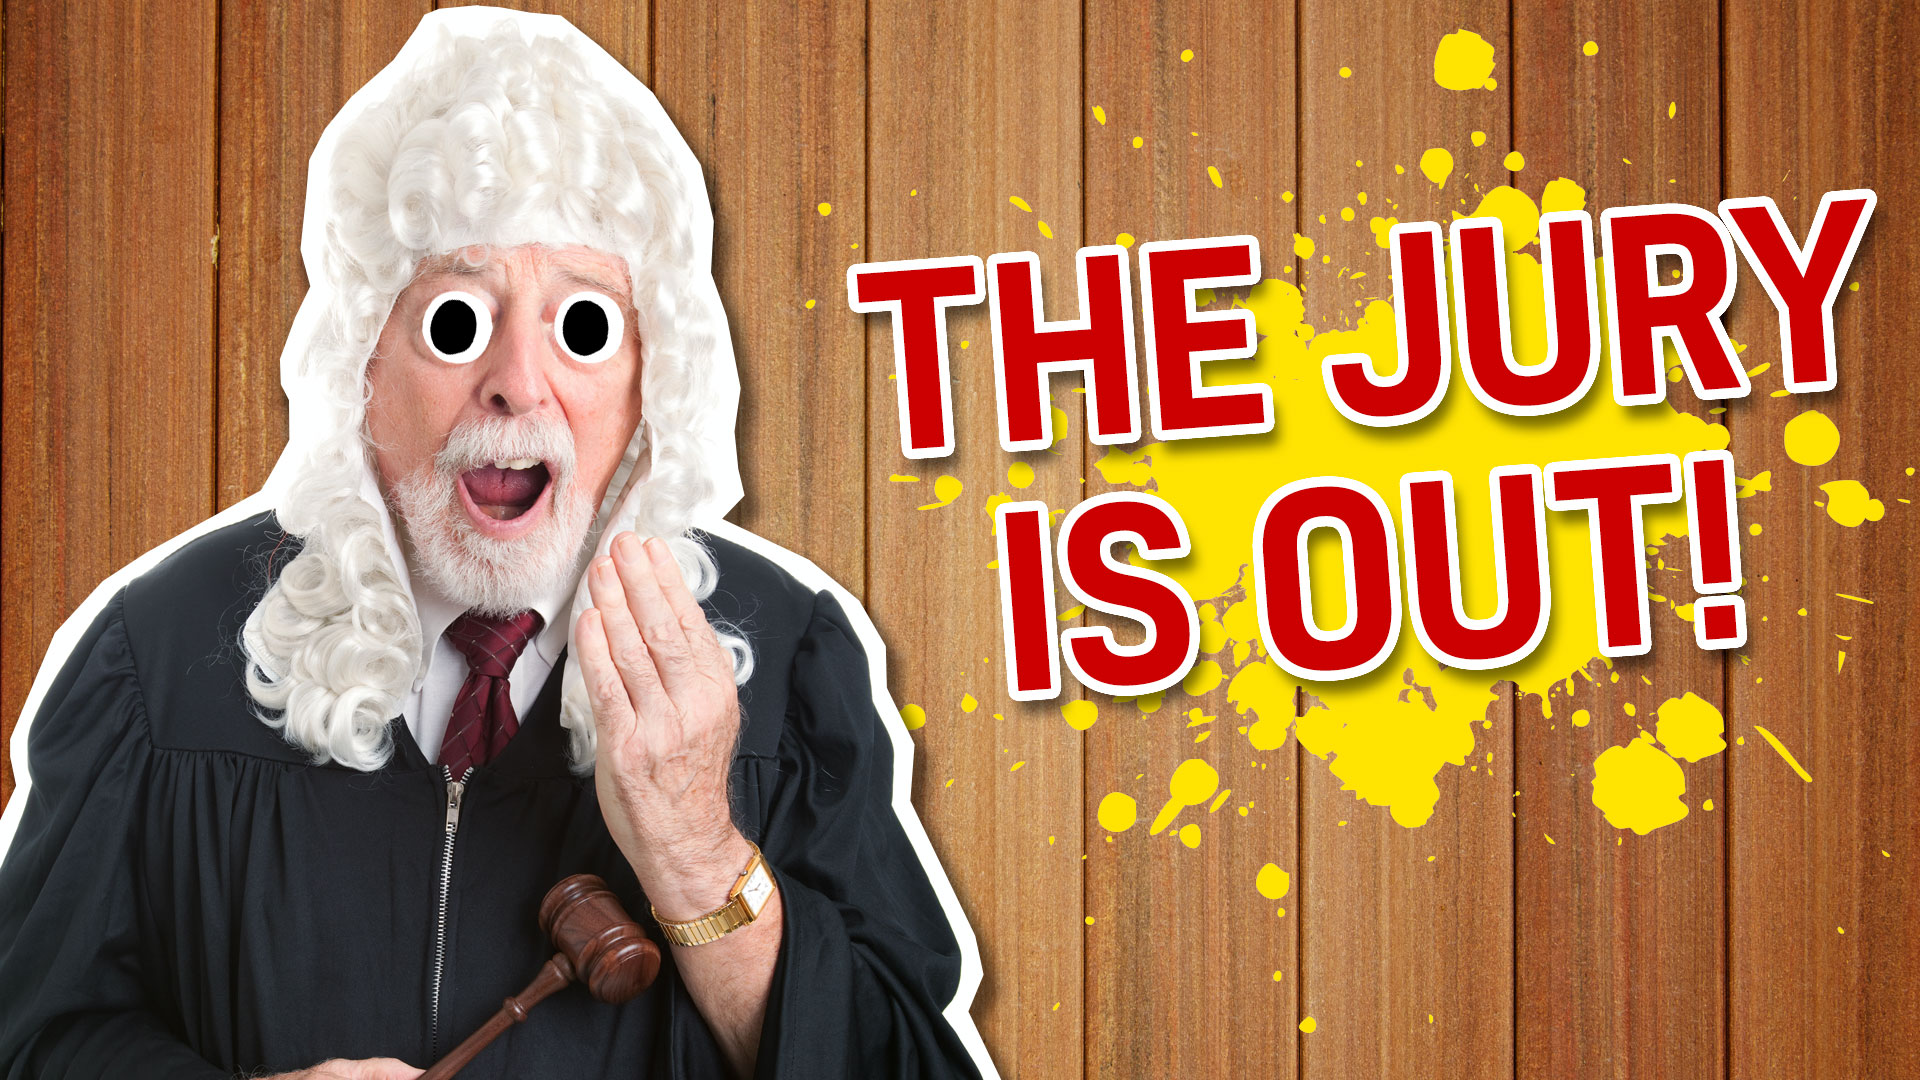 Result: The jury's out